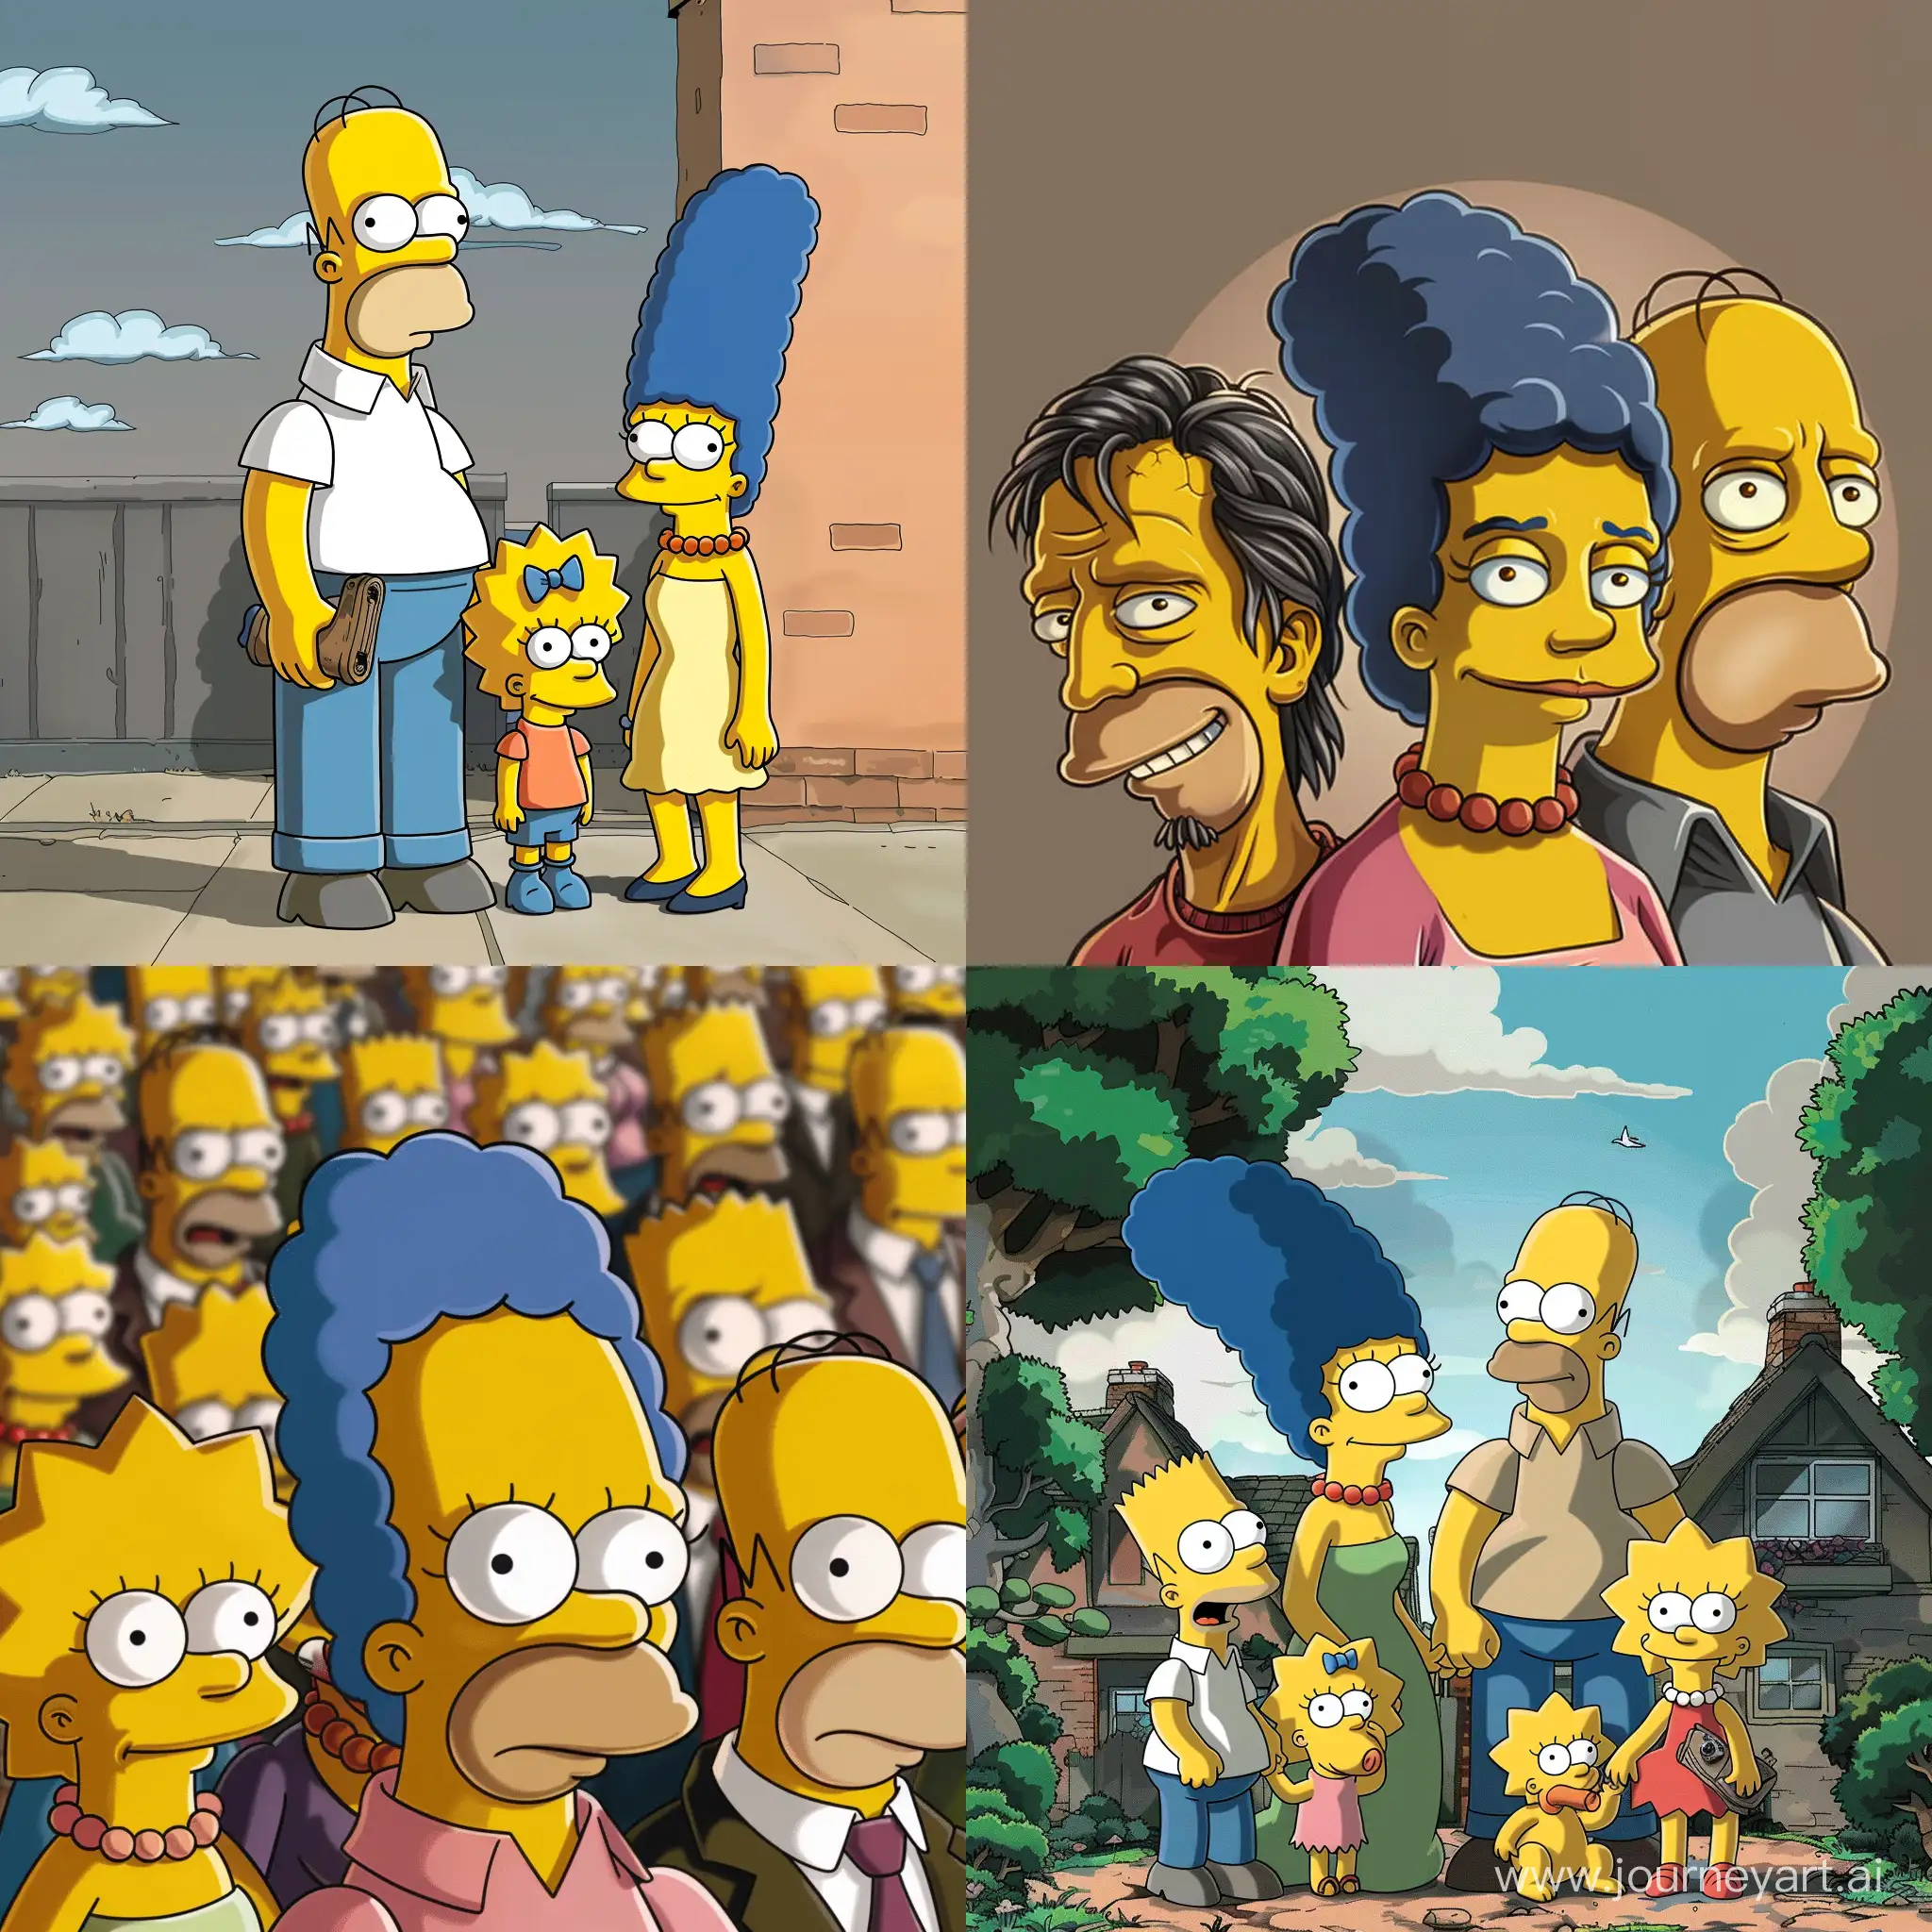 Realistic-Portrayal-of-The-Simpsons-Characters-in-a-Square-Format